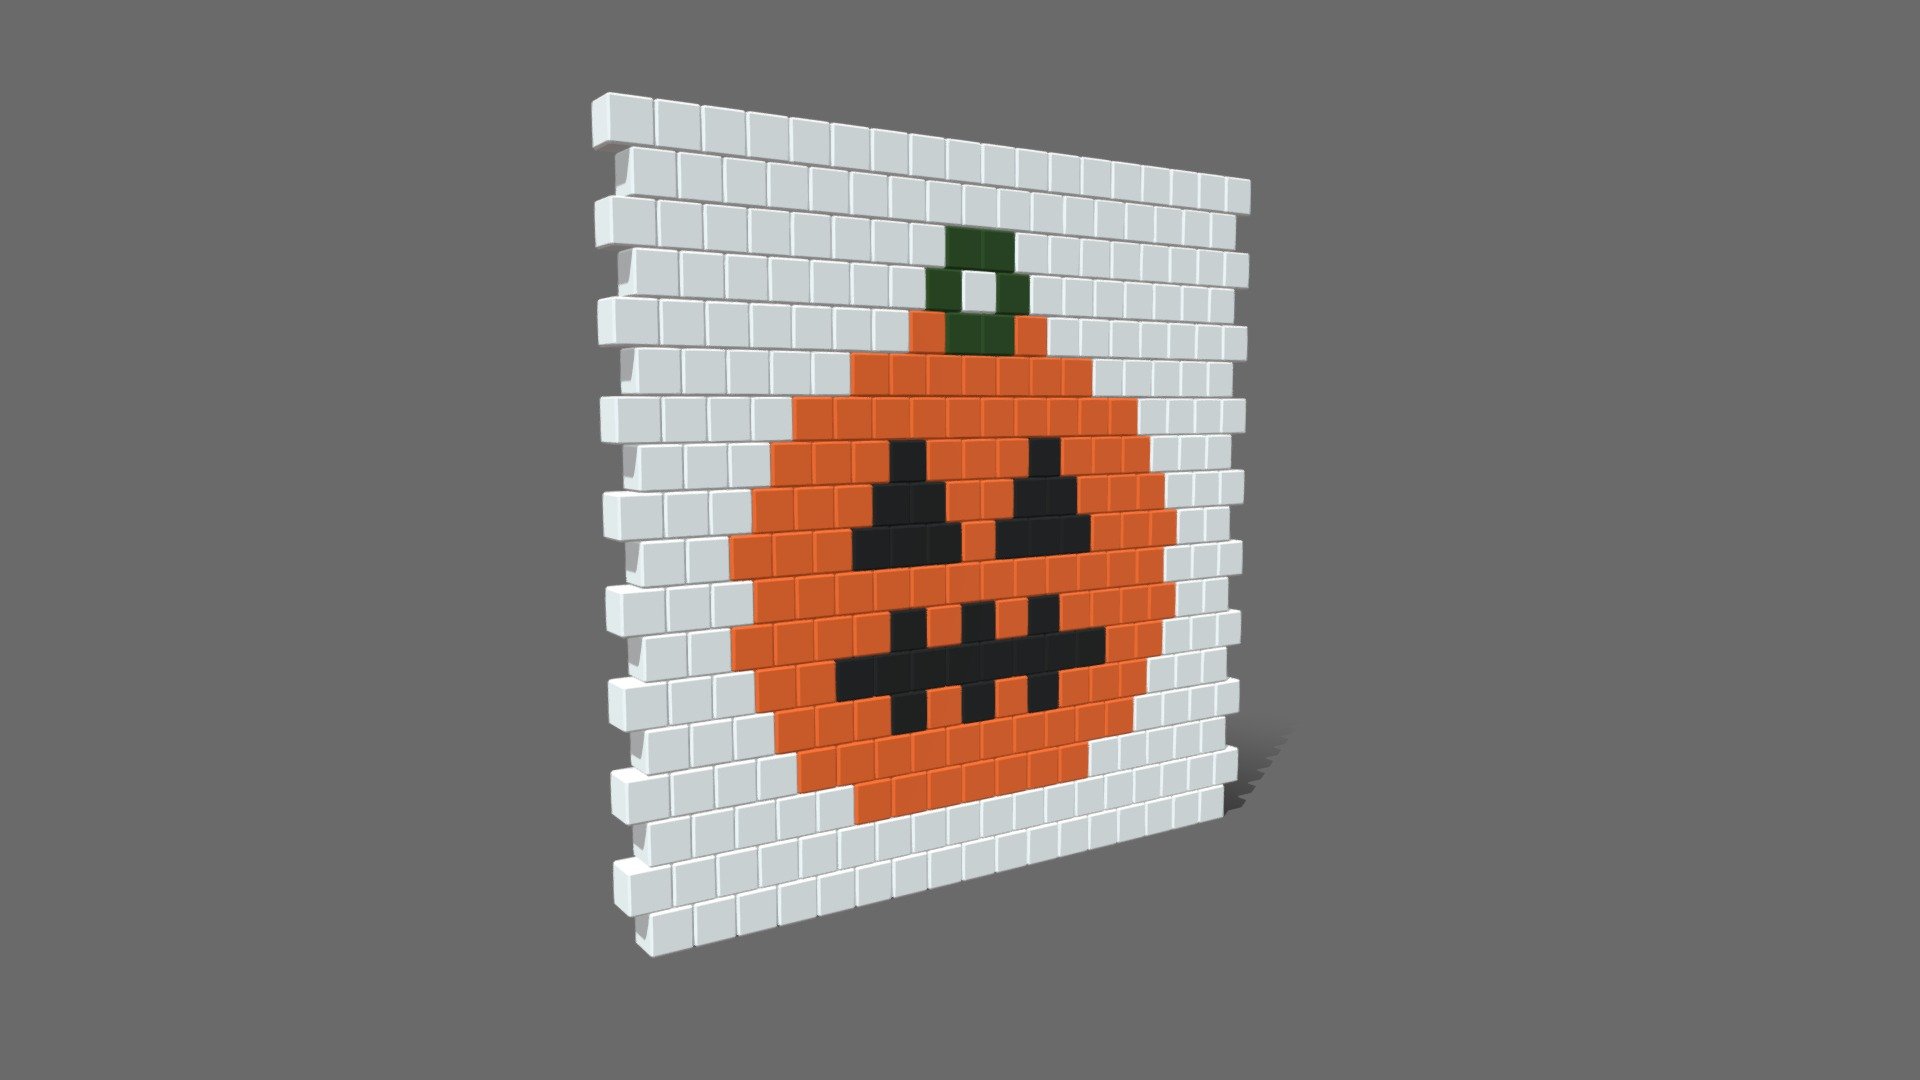 This is a low poly 3D model of a Pumpkin wall decoration item. The Pumpkin wall was modeled and prepared for low-poly style renderings, background, general CG visualization presented as a mesh with quads/tris.

Verts : 7.560 Faces: 8.190

The 3D model have simple materials with diffuse colors.

No ring, maps and no UVW mapping is available.

The original file was created in blender. You will receive a 3DS, OBJ, FBX, blend, DAE, Stl.

All preview images were rendered with Blender Cycles. Product is ready to render out-of-the-box. Please note that the lights, cameras, and background is only included in the .blend file. The model is clean and alone in the other provided files, centred at origin and has real-world scale 3d model